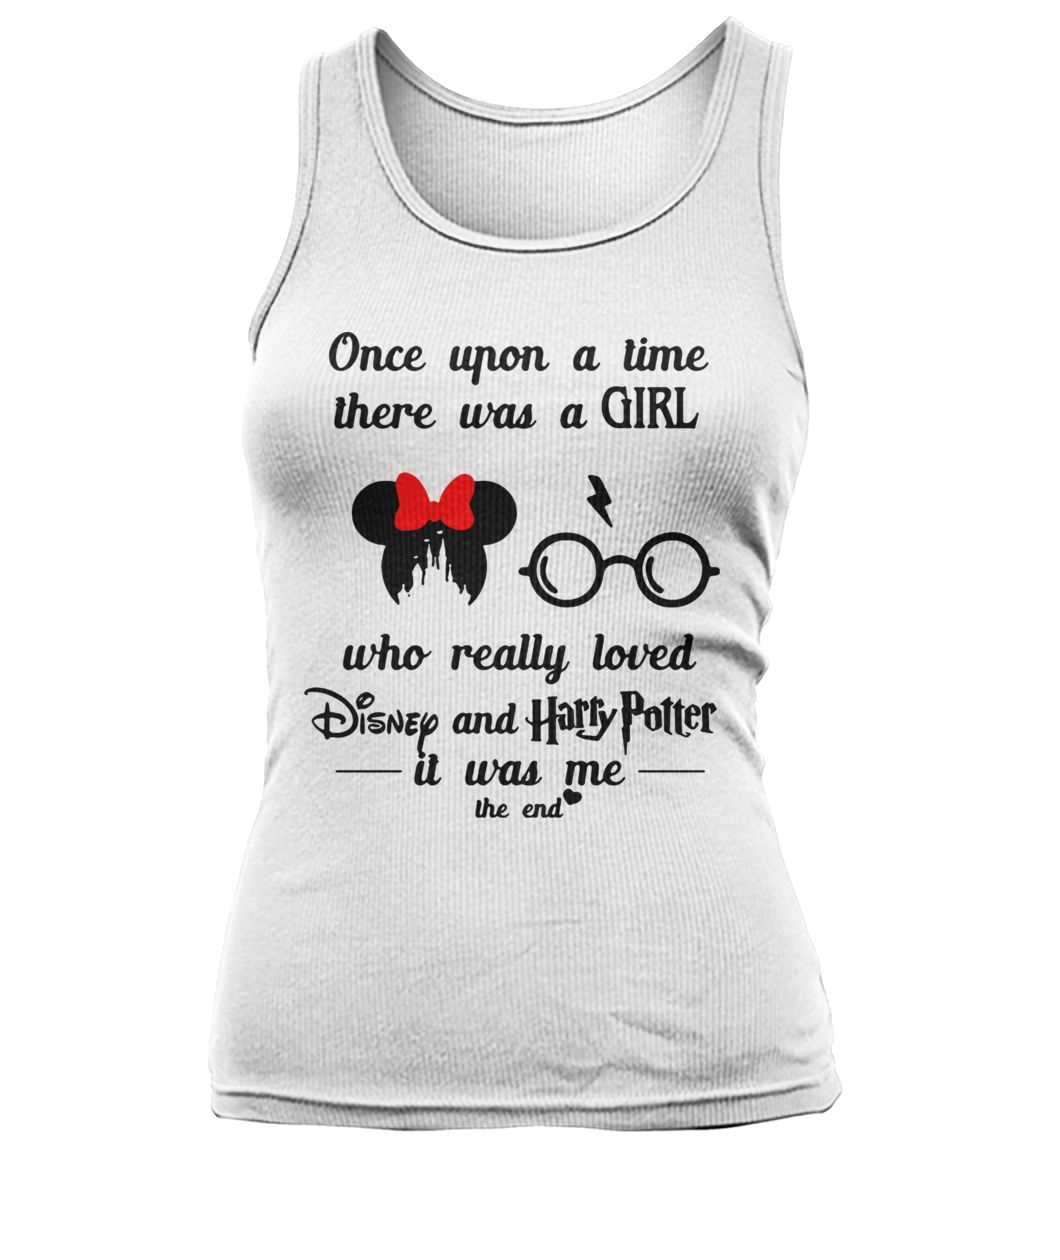 Once upon a time there was a girl who really loved disney and harry potter it was me the end women's tank top